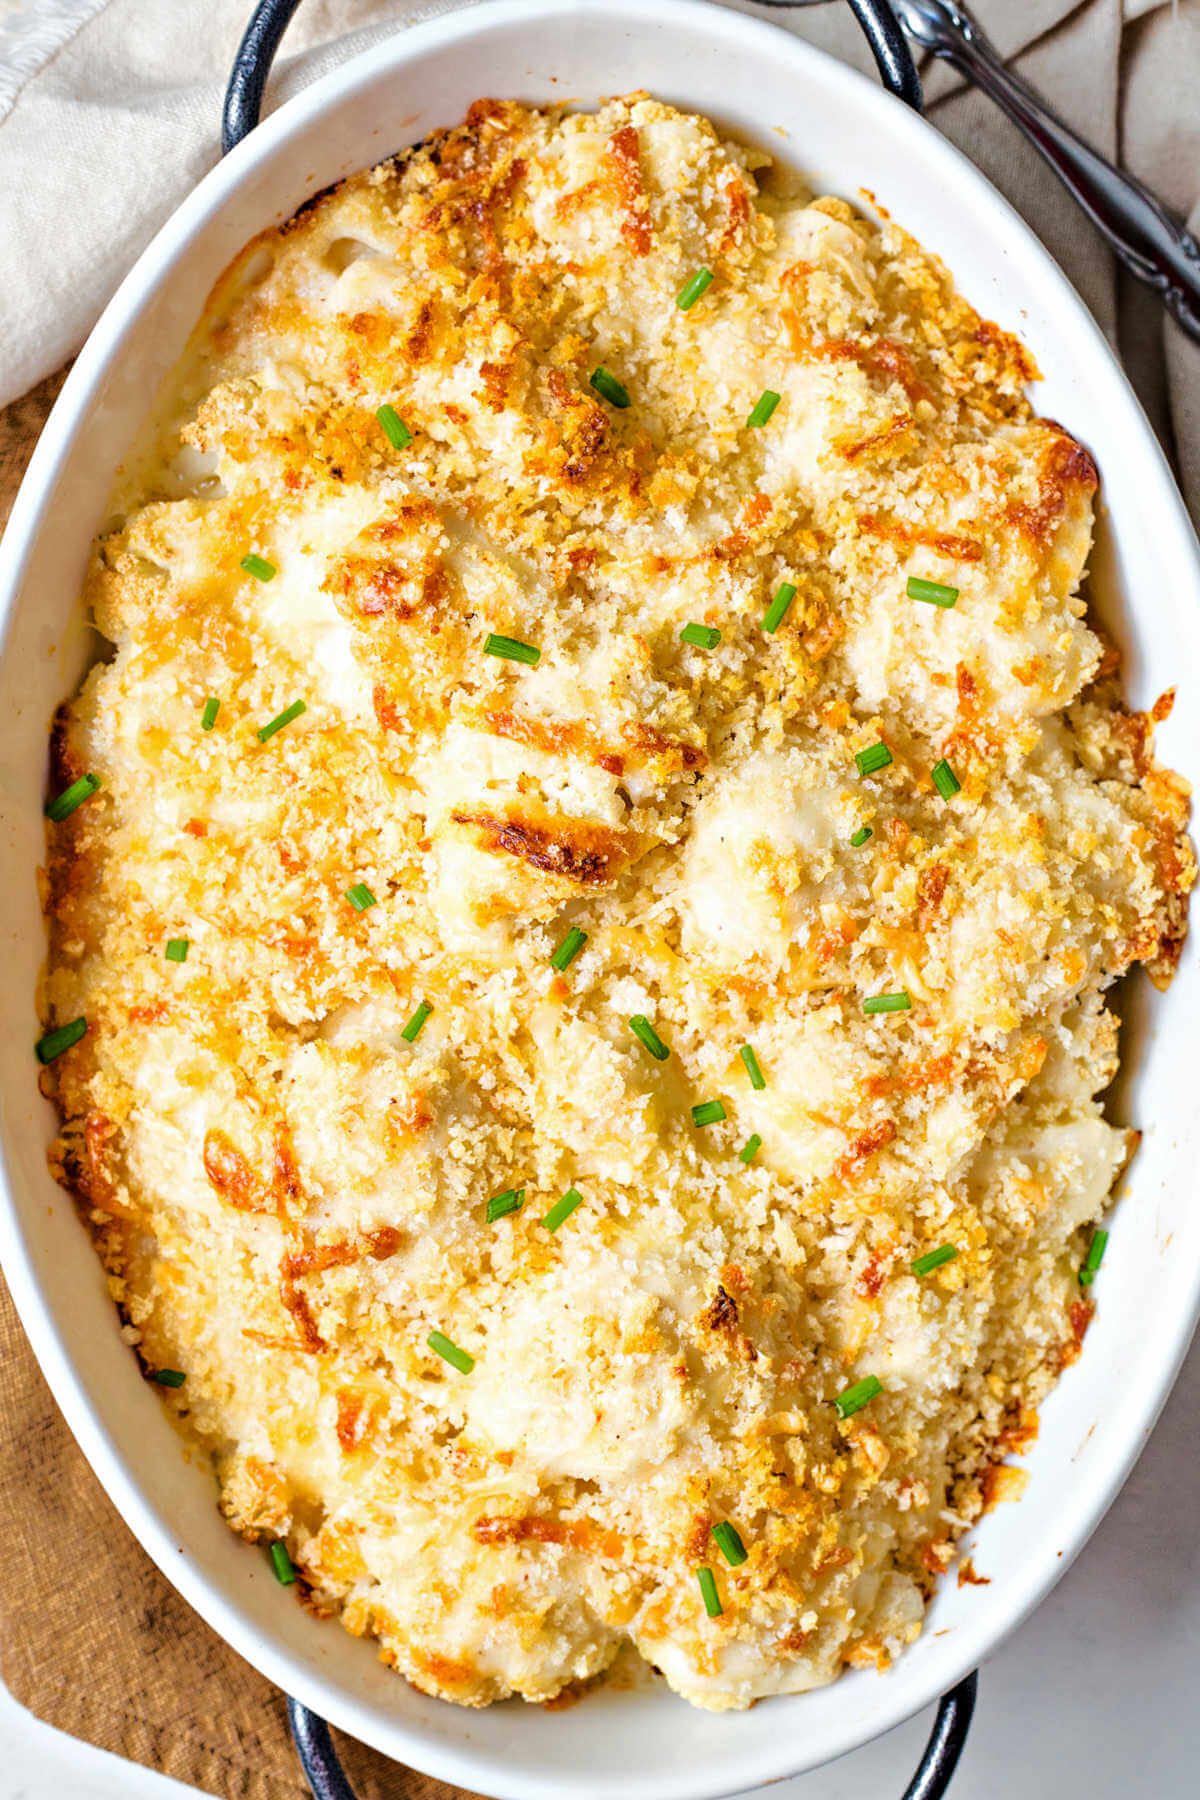 cauliflower gratin with toasted breadcrumbs and garnished with chopped chives in a baking dish.